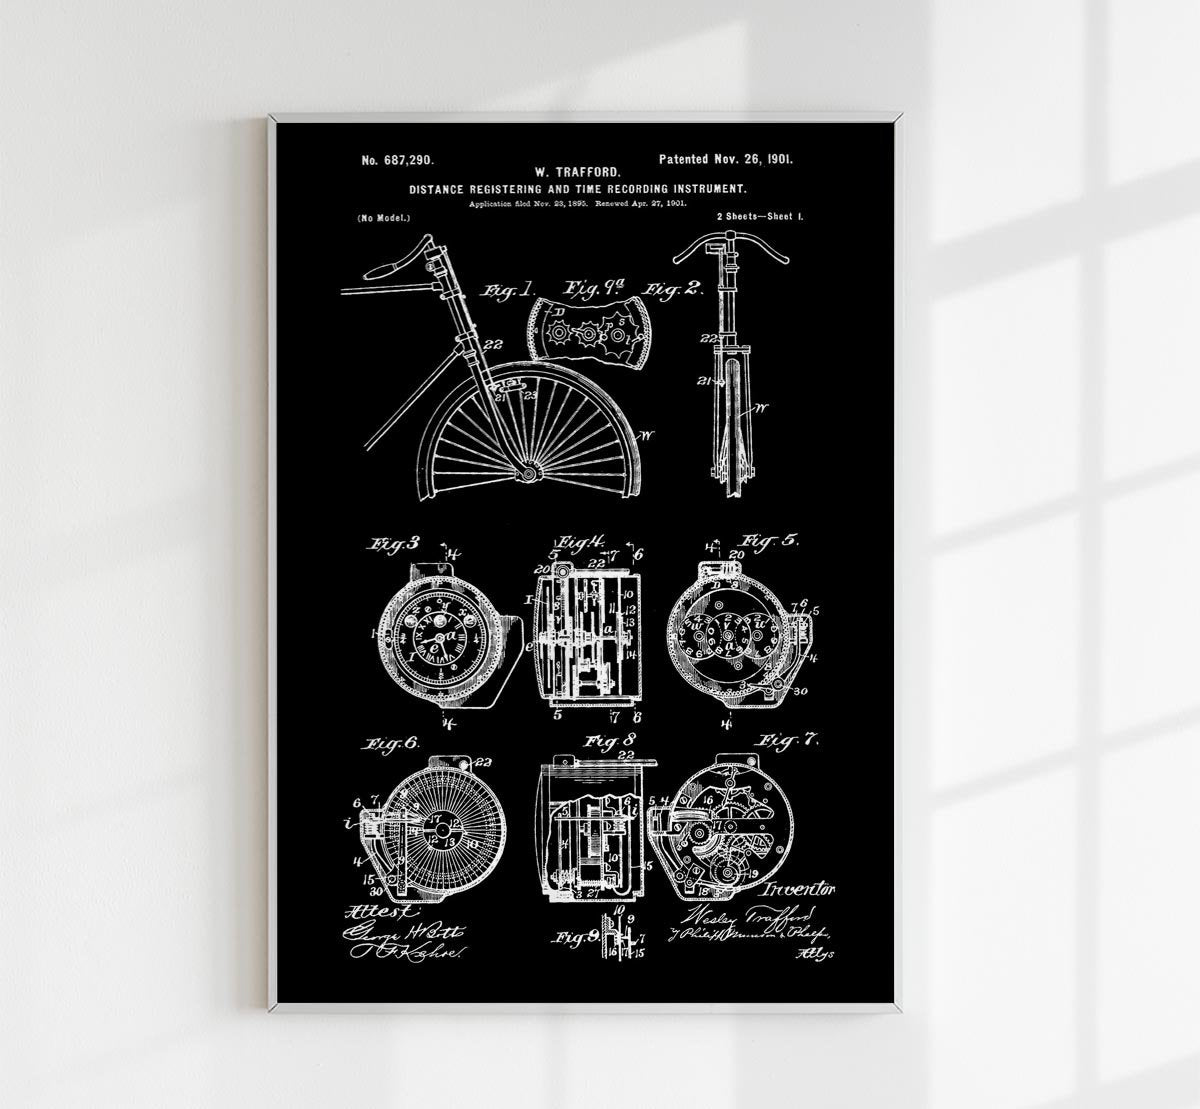 Distance & Time Recording Instrument Patent Poster